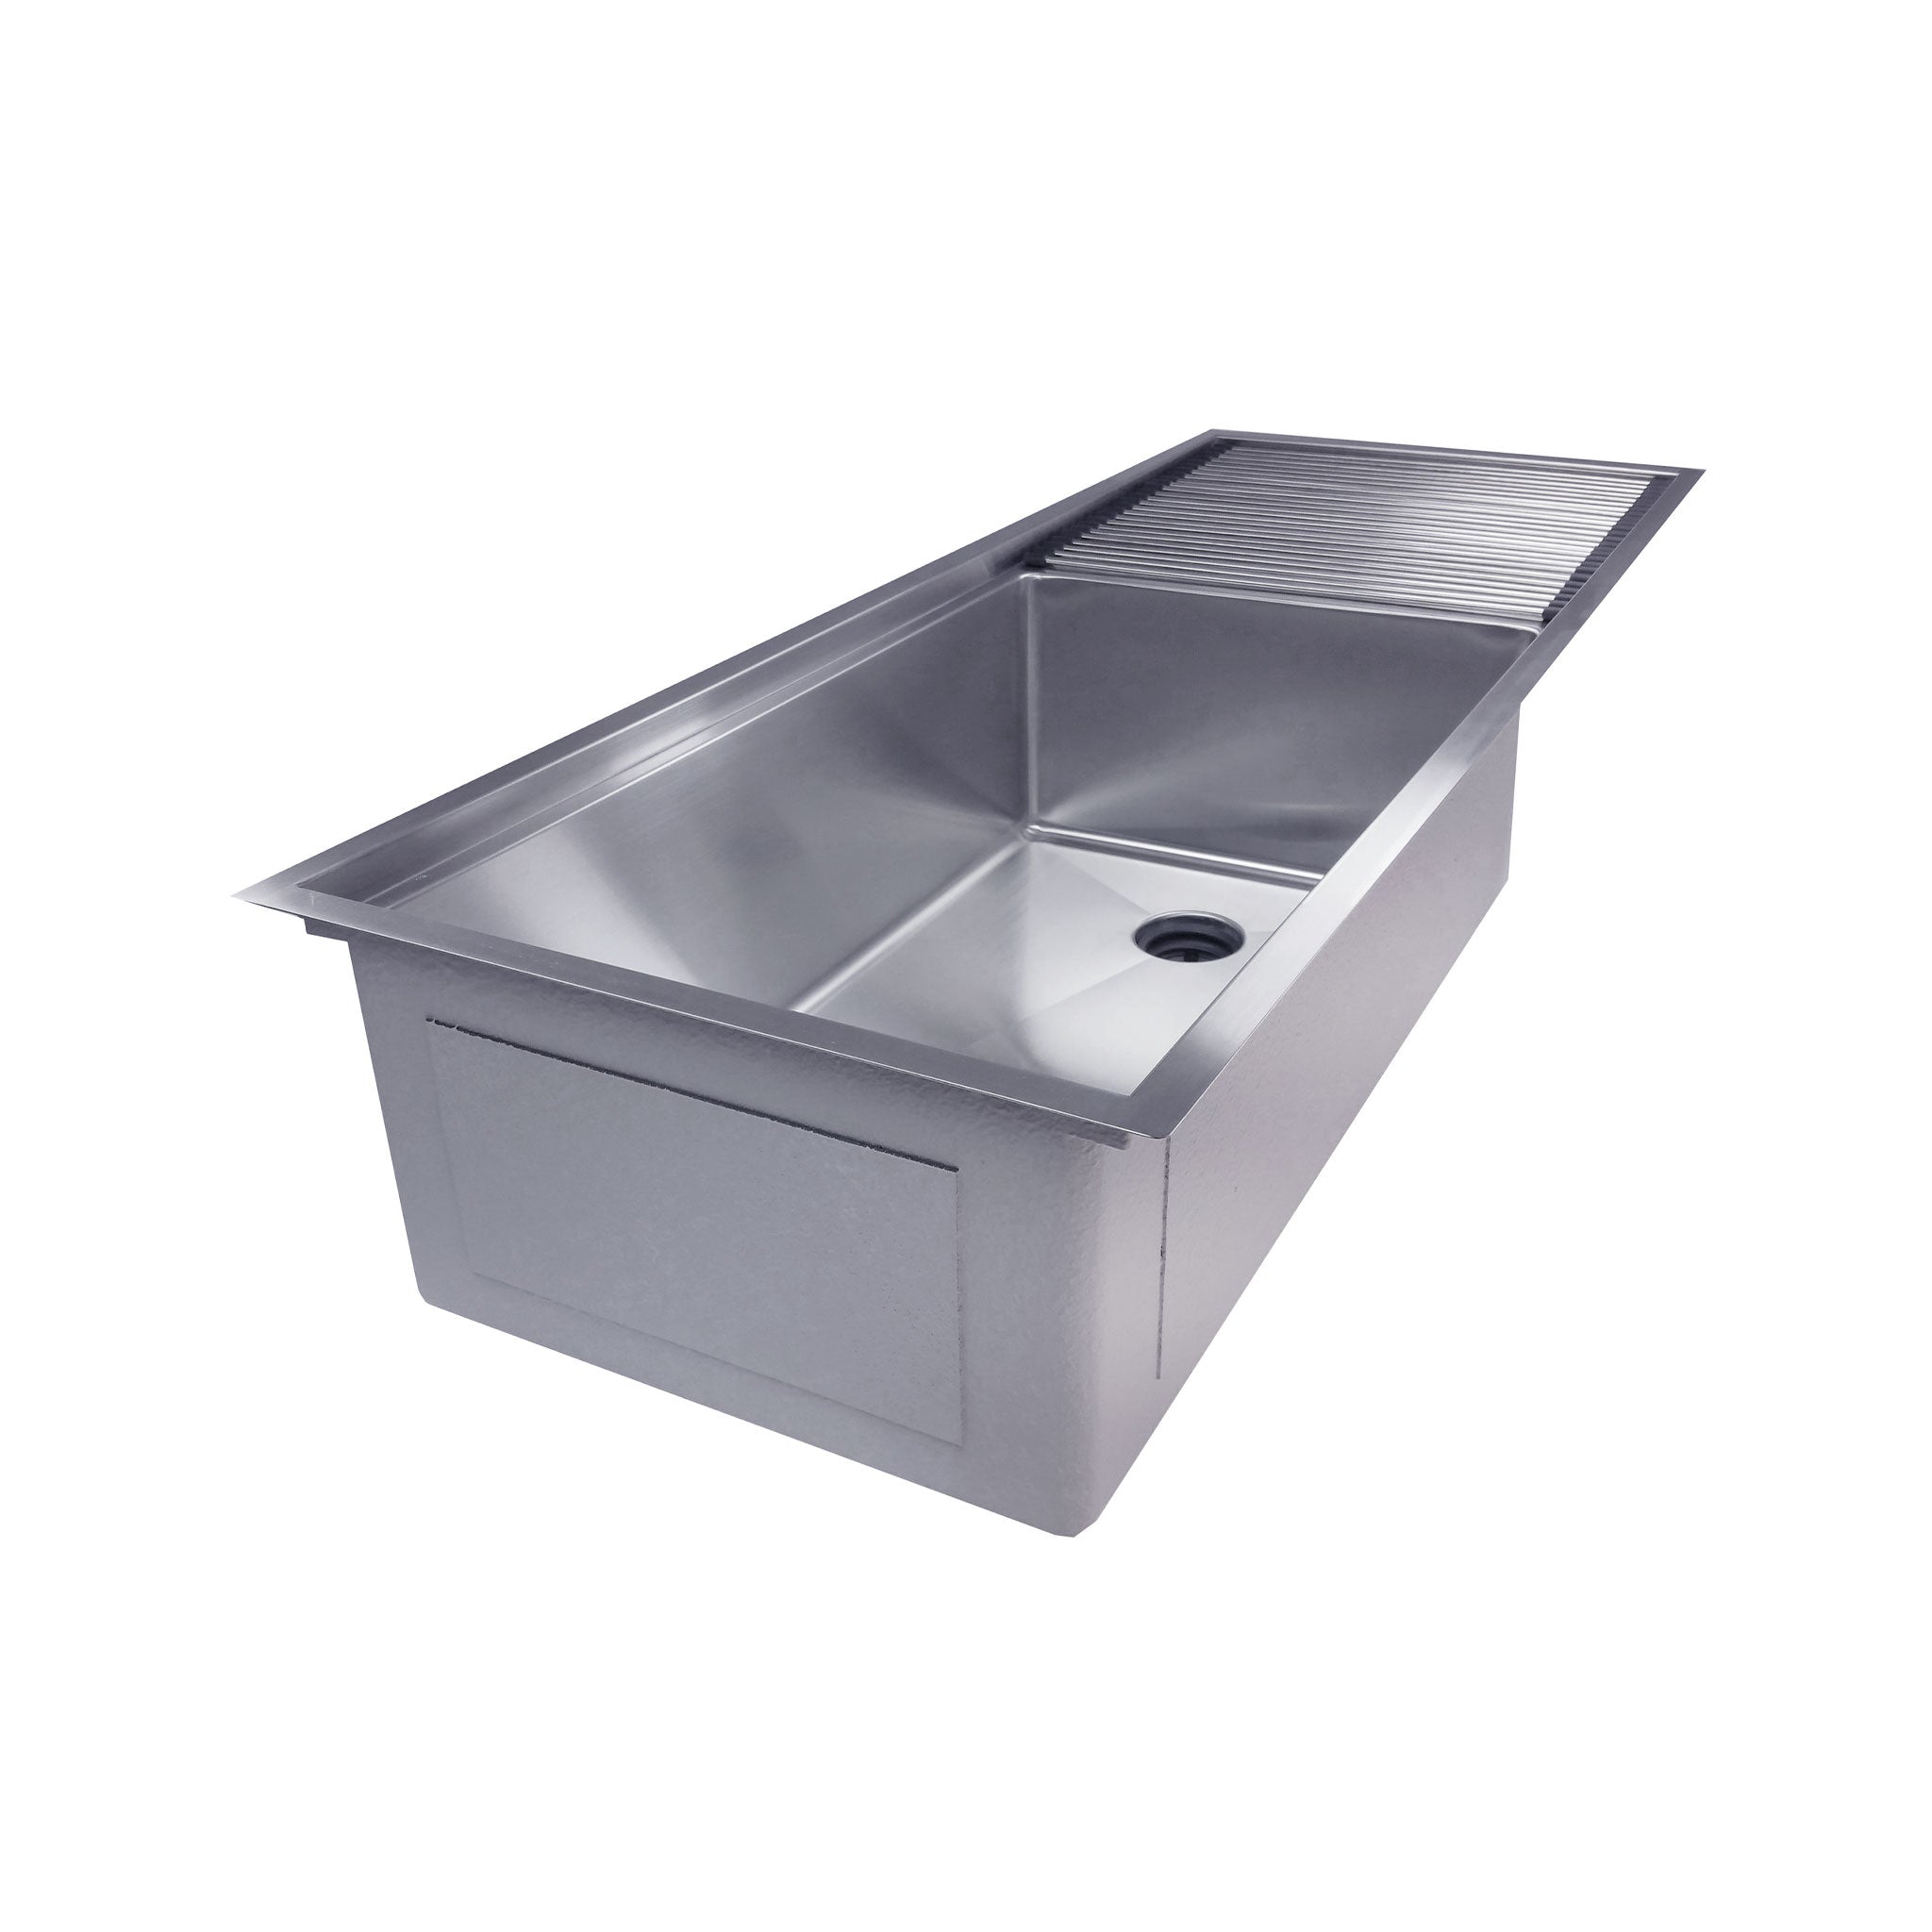 304 stainless workstation drainboard sink with reversible drain off to the side